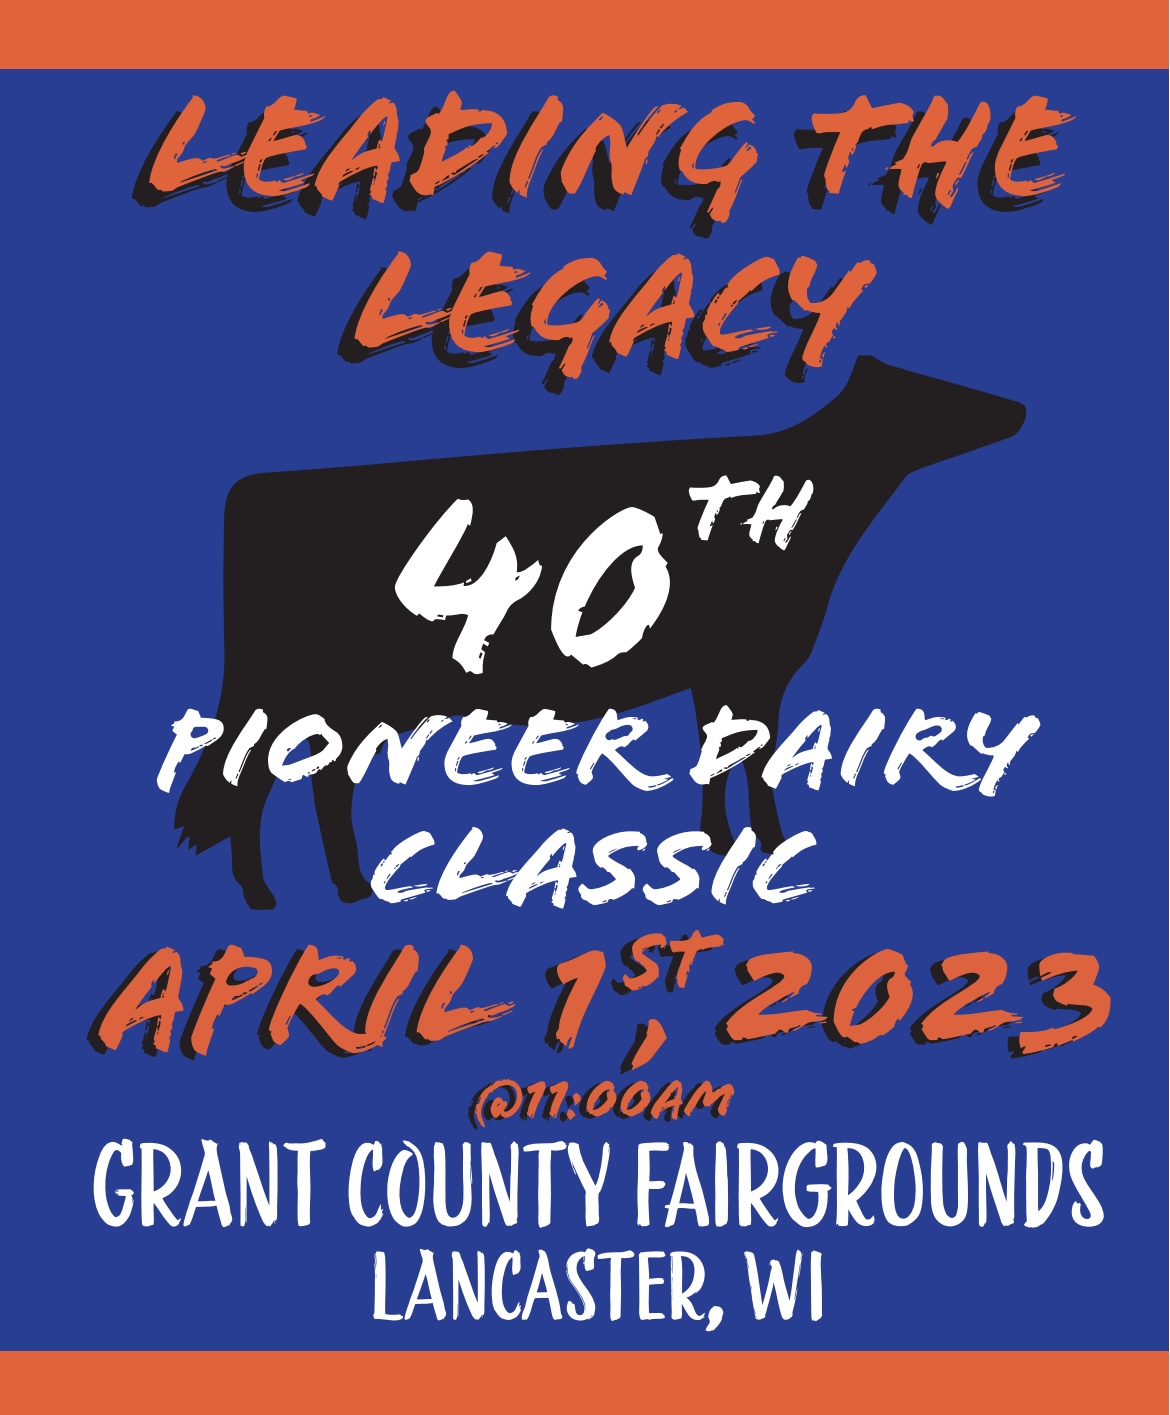 40th Annual Pioneer Dairy Classic